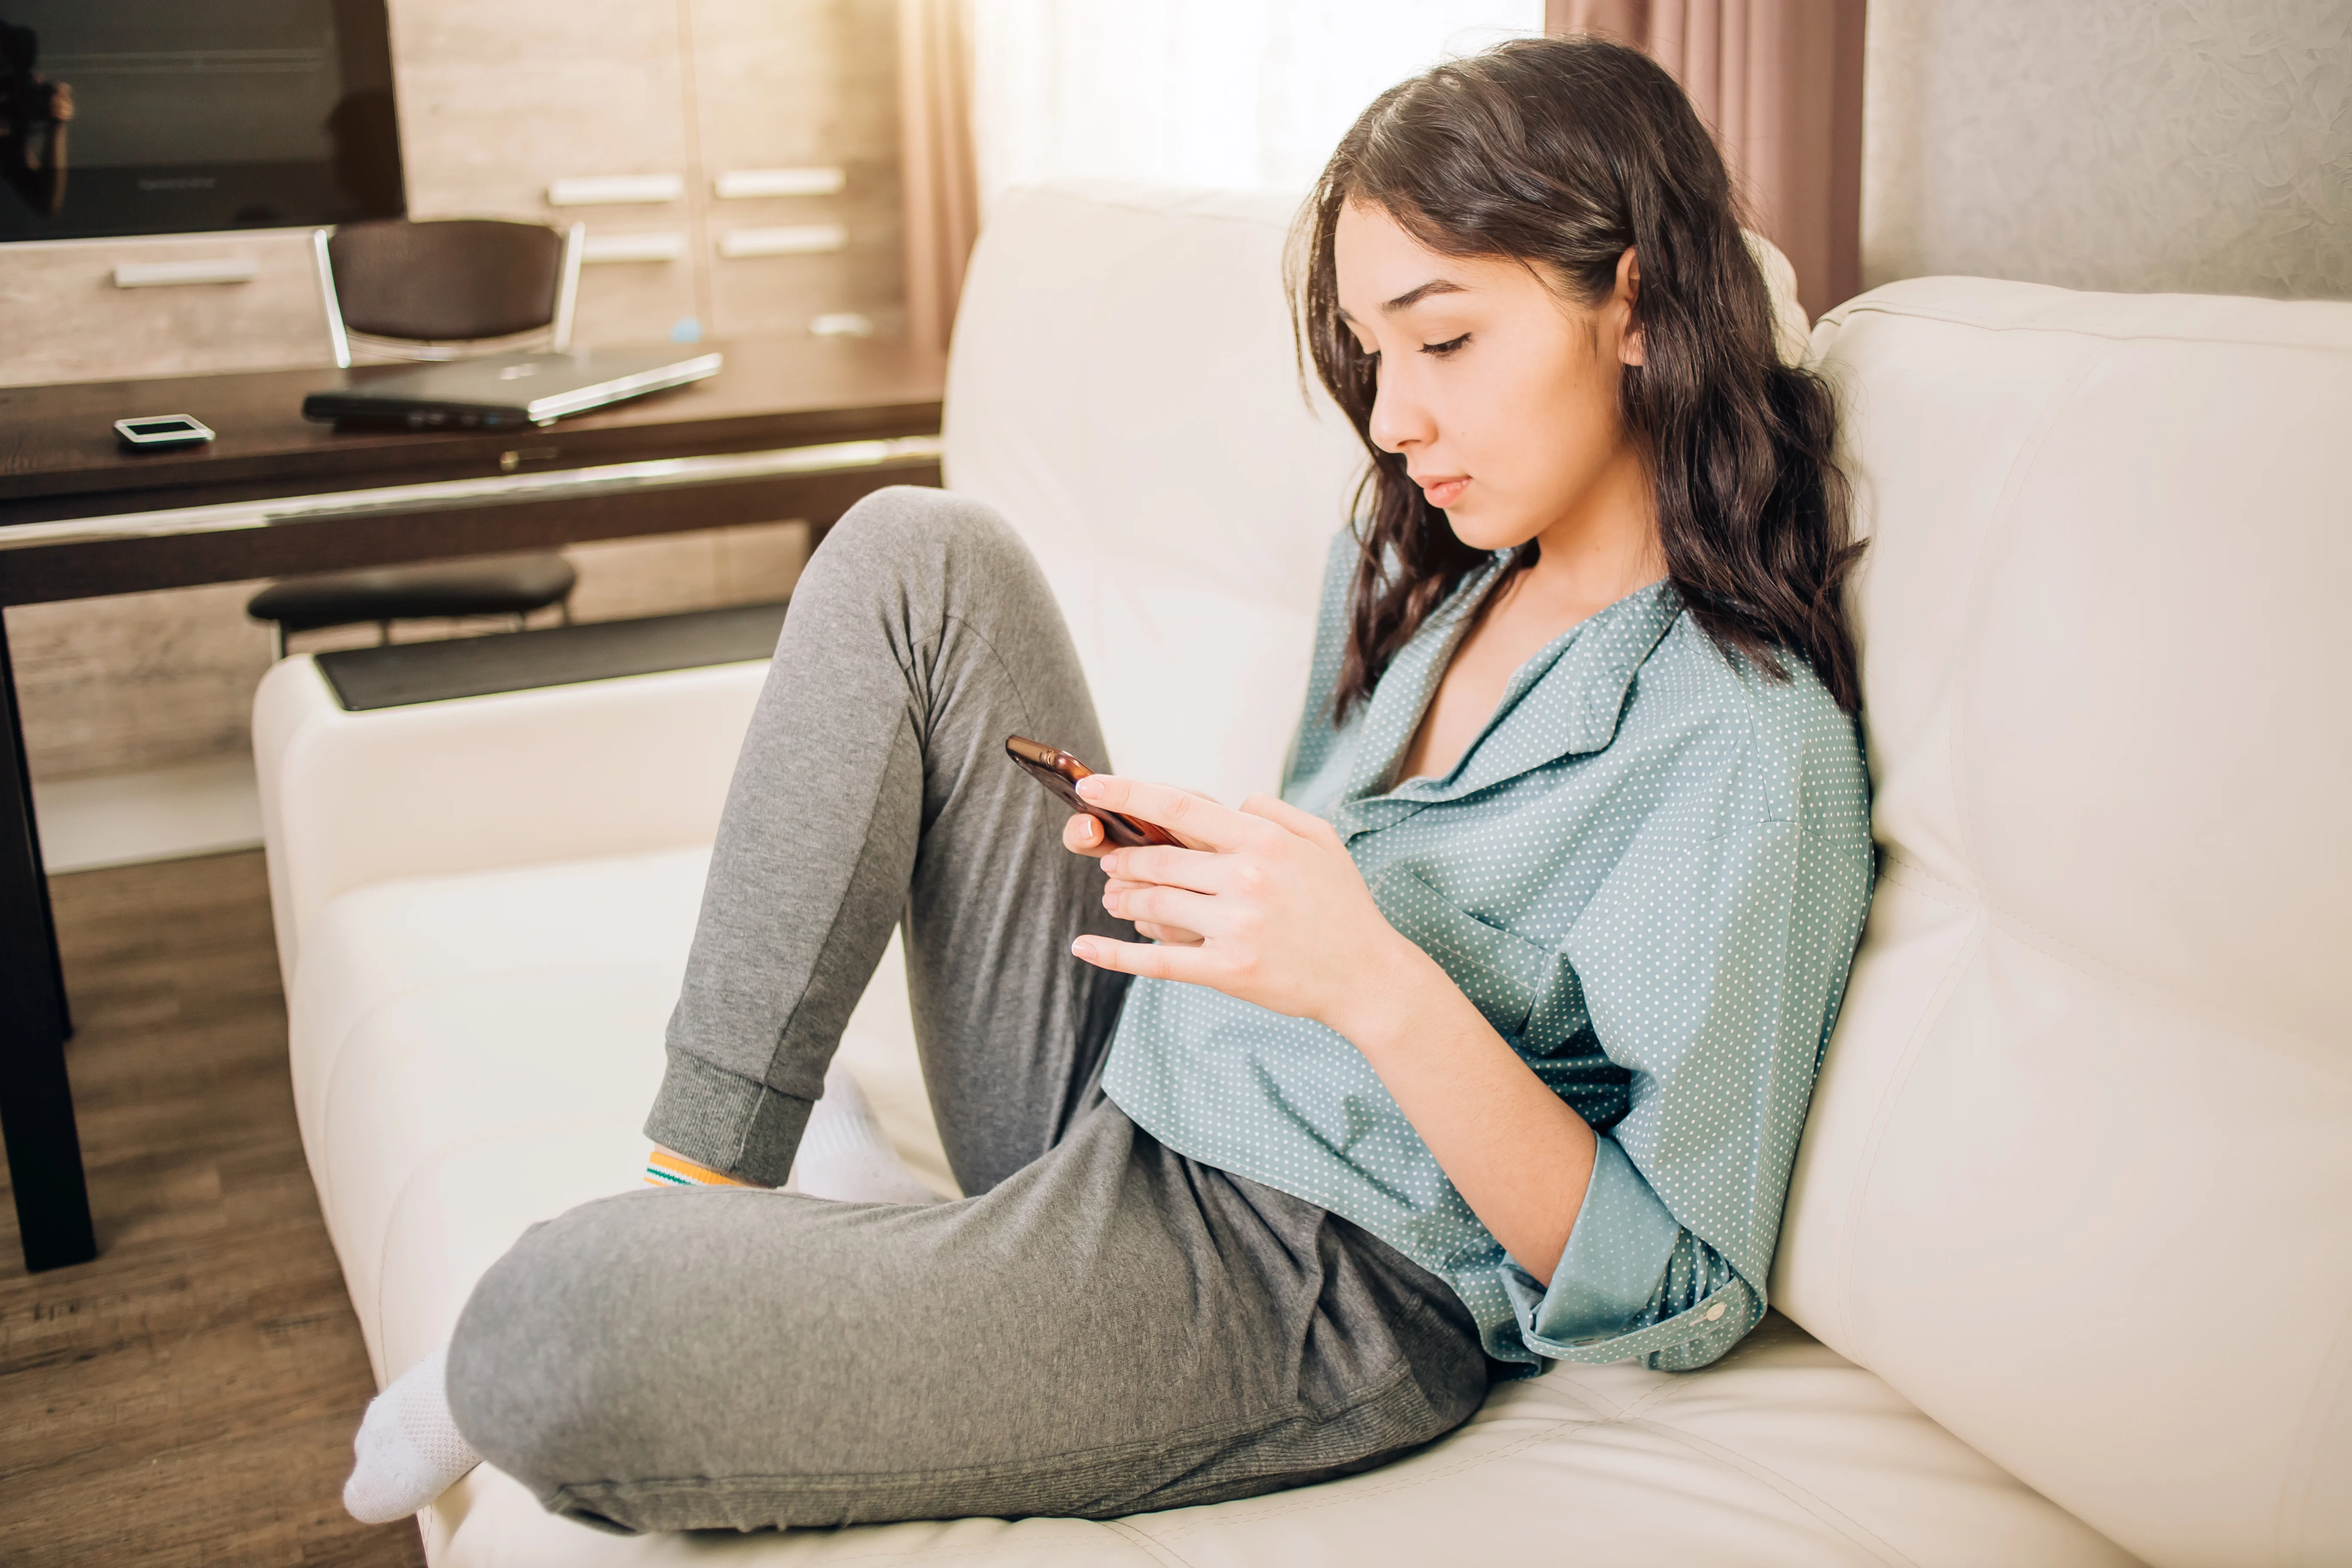 Girl sitting on a couch looking at her phone